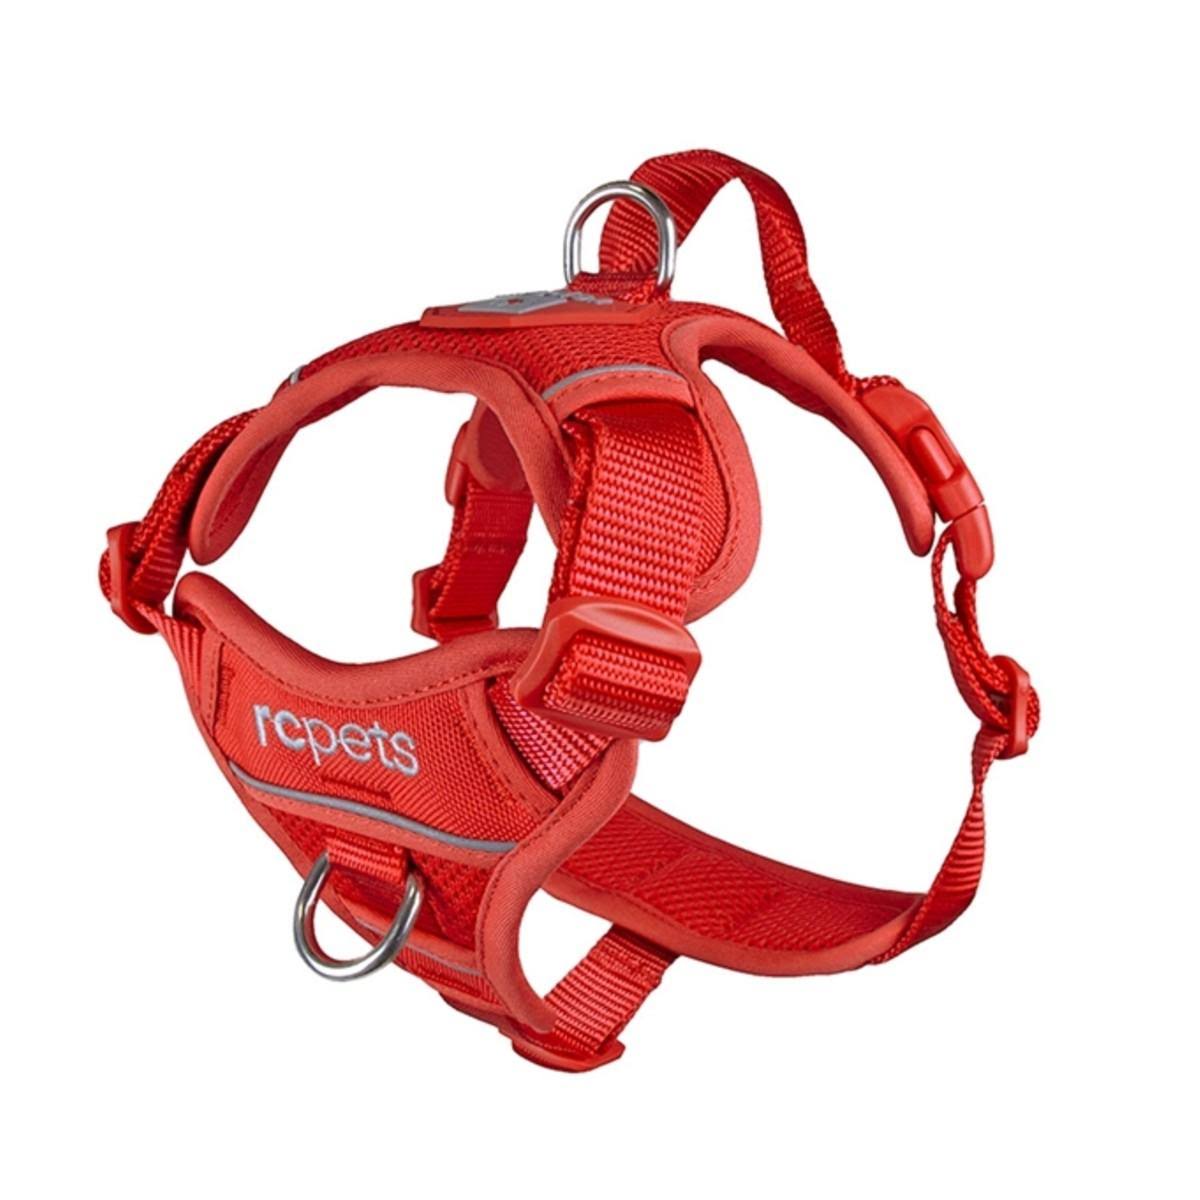 RC Pet Products Momentum Control Dog Harness, Goji Berry, Small